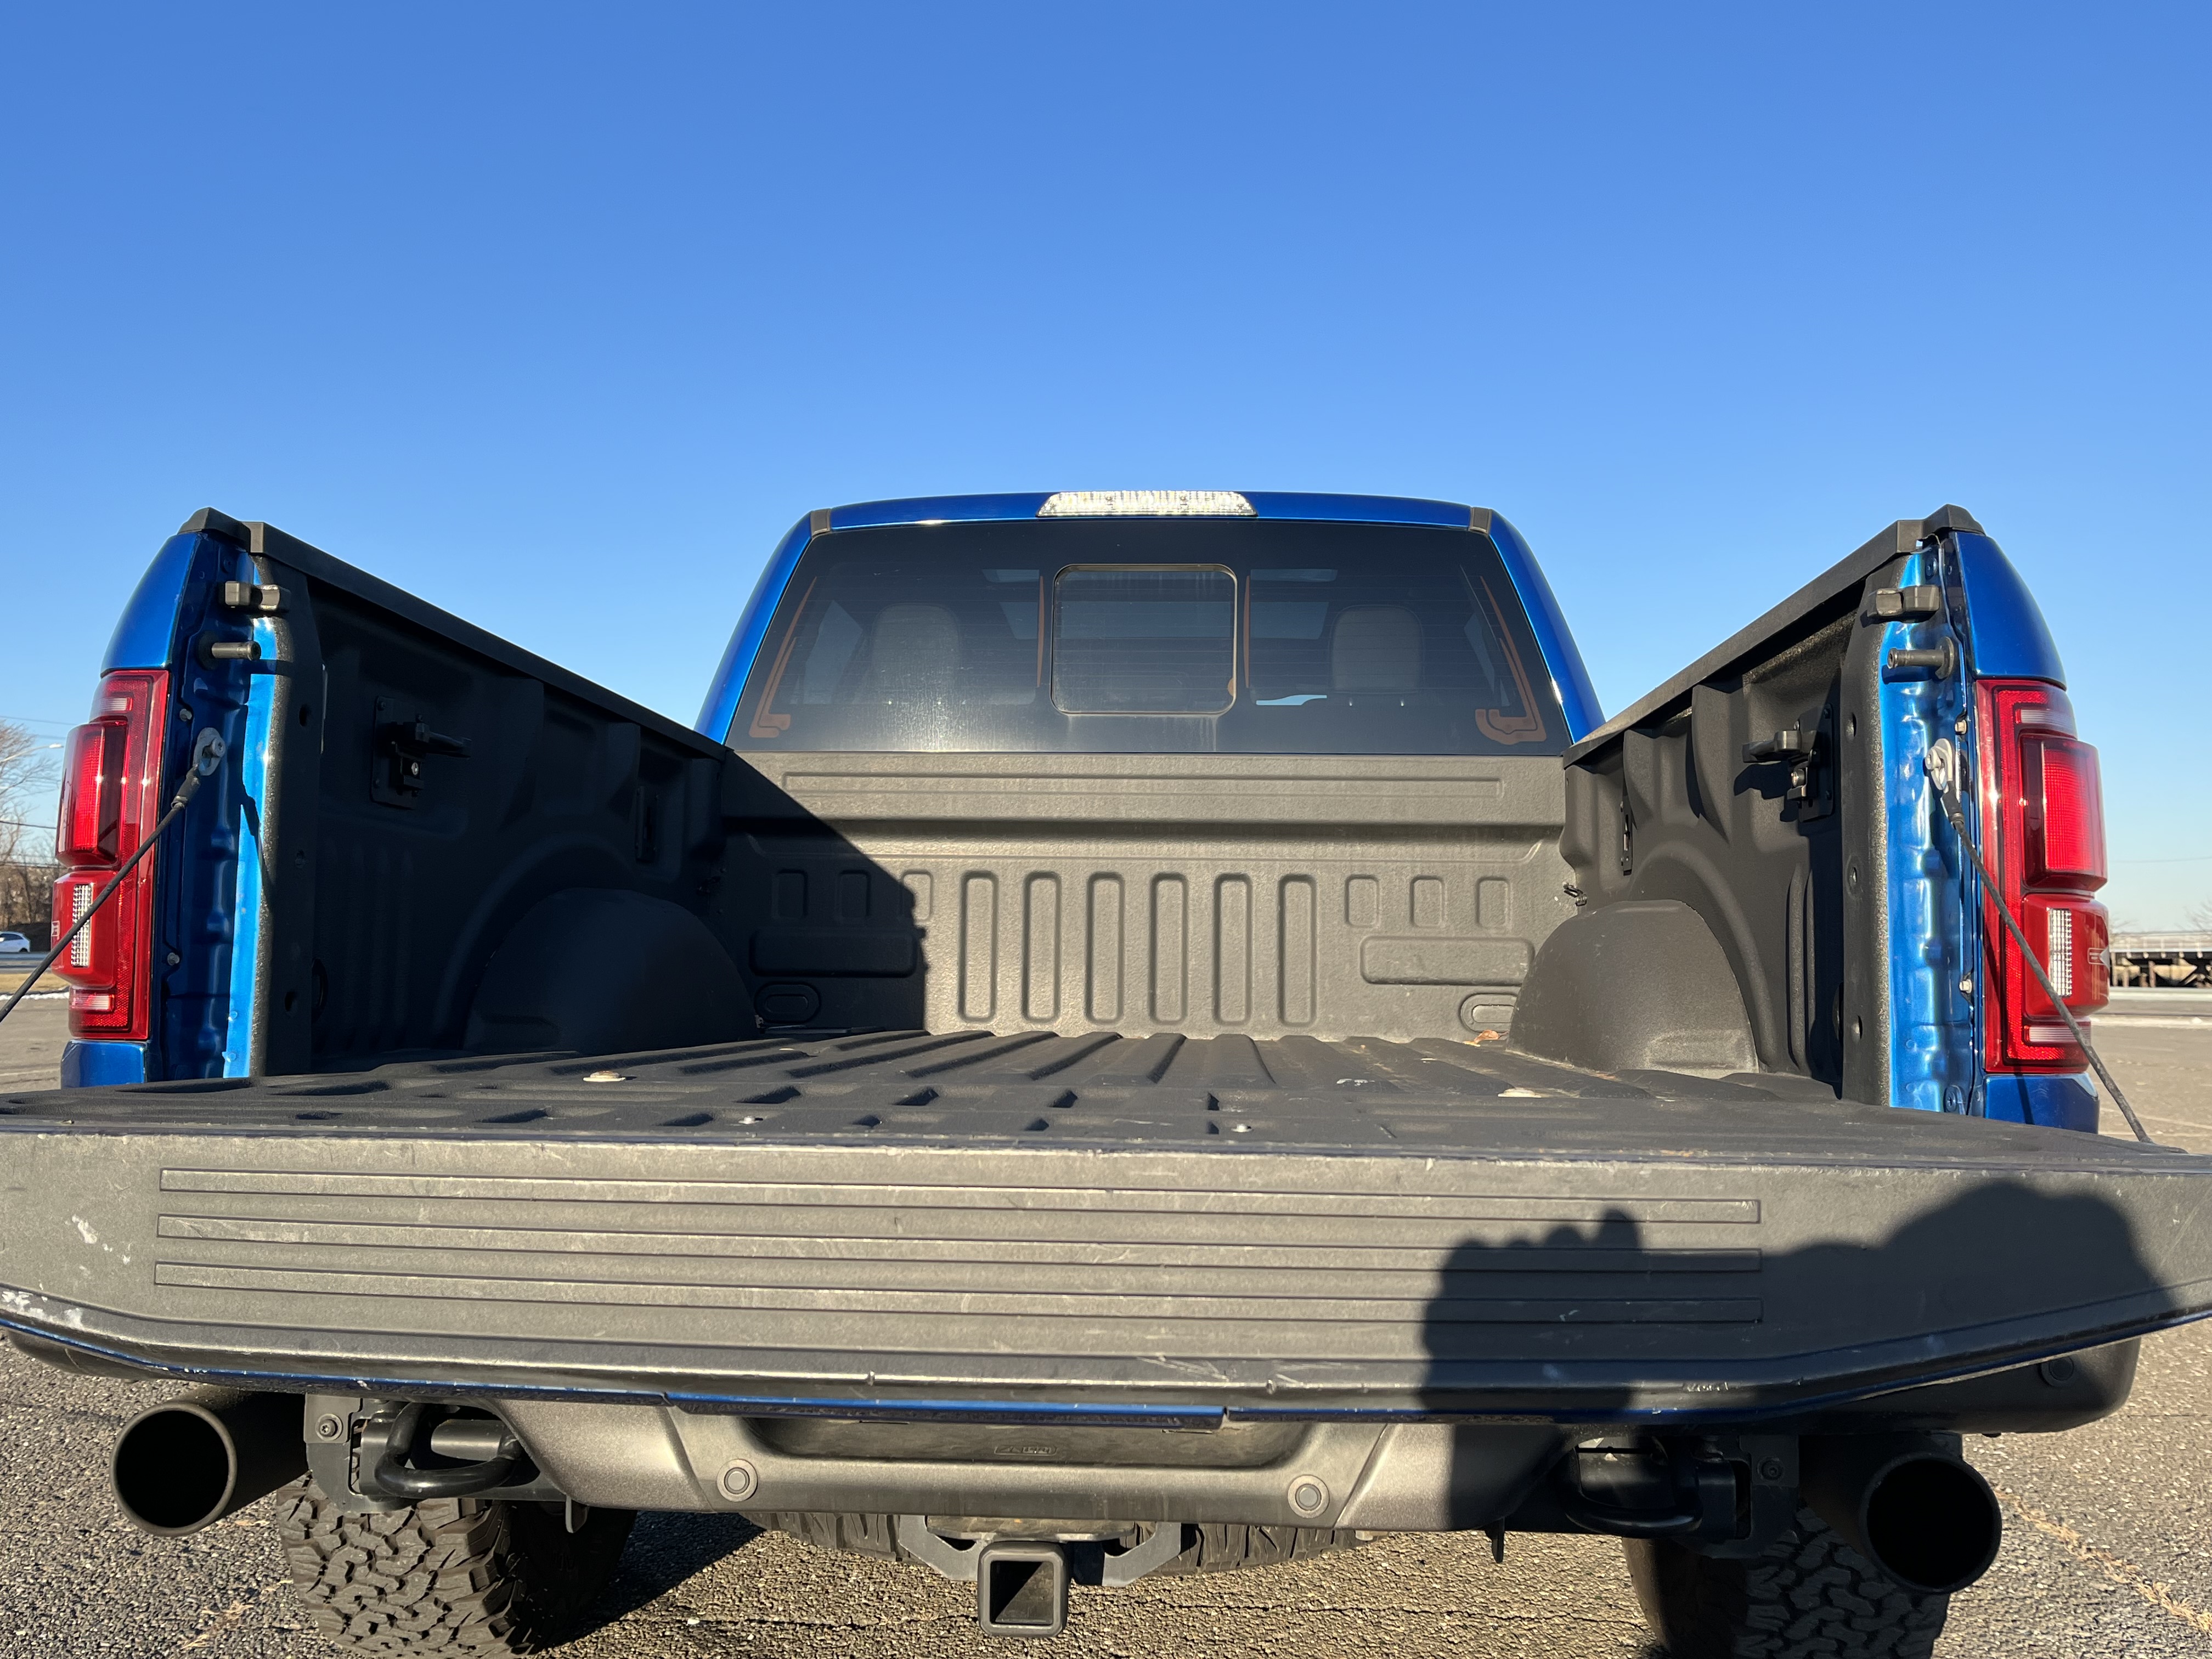 Used - Ford F-150 Raptor 4x4 SuperCrew Pickup Truck for sale in Staten Island NY